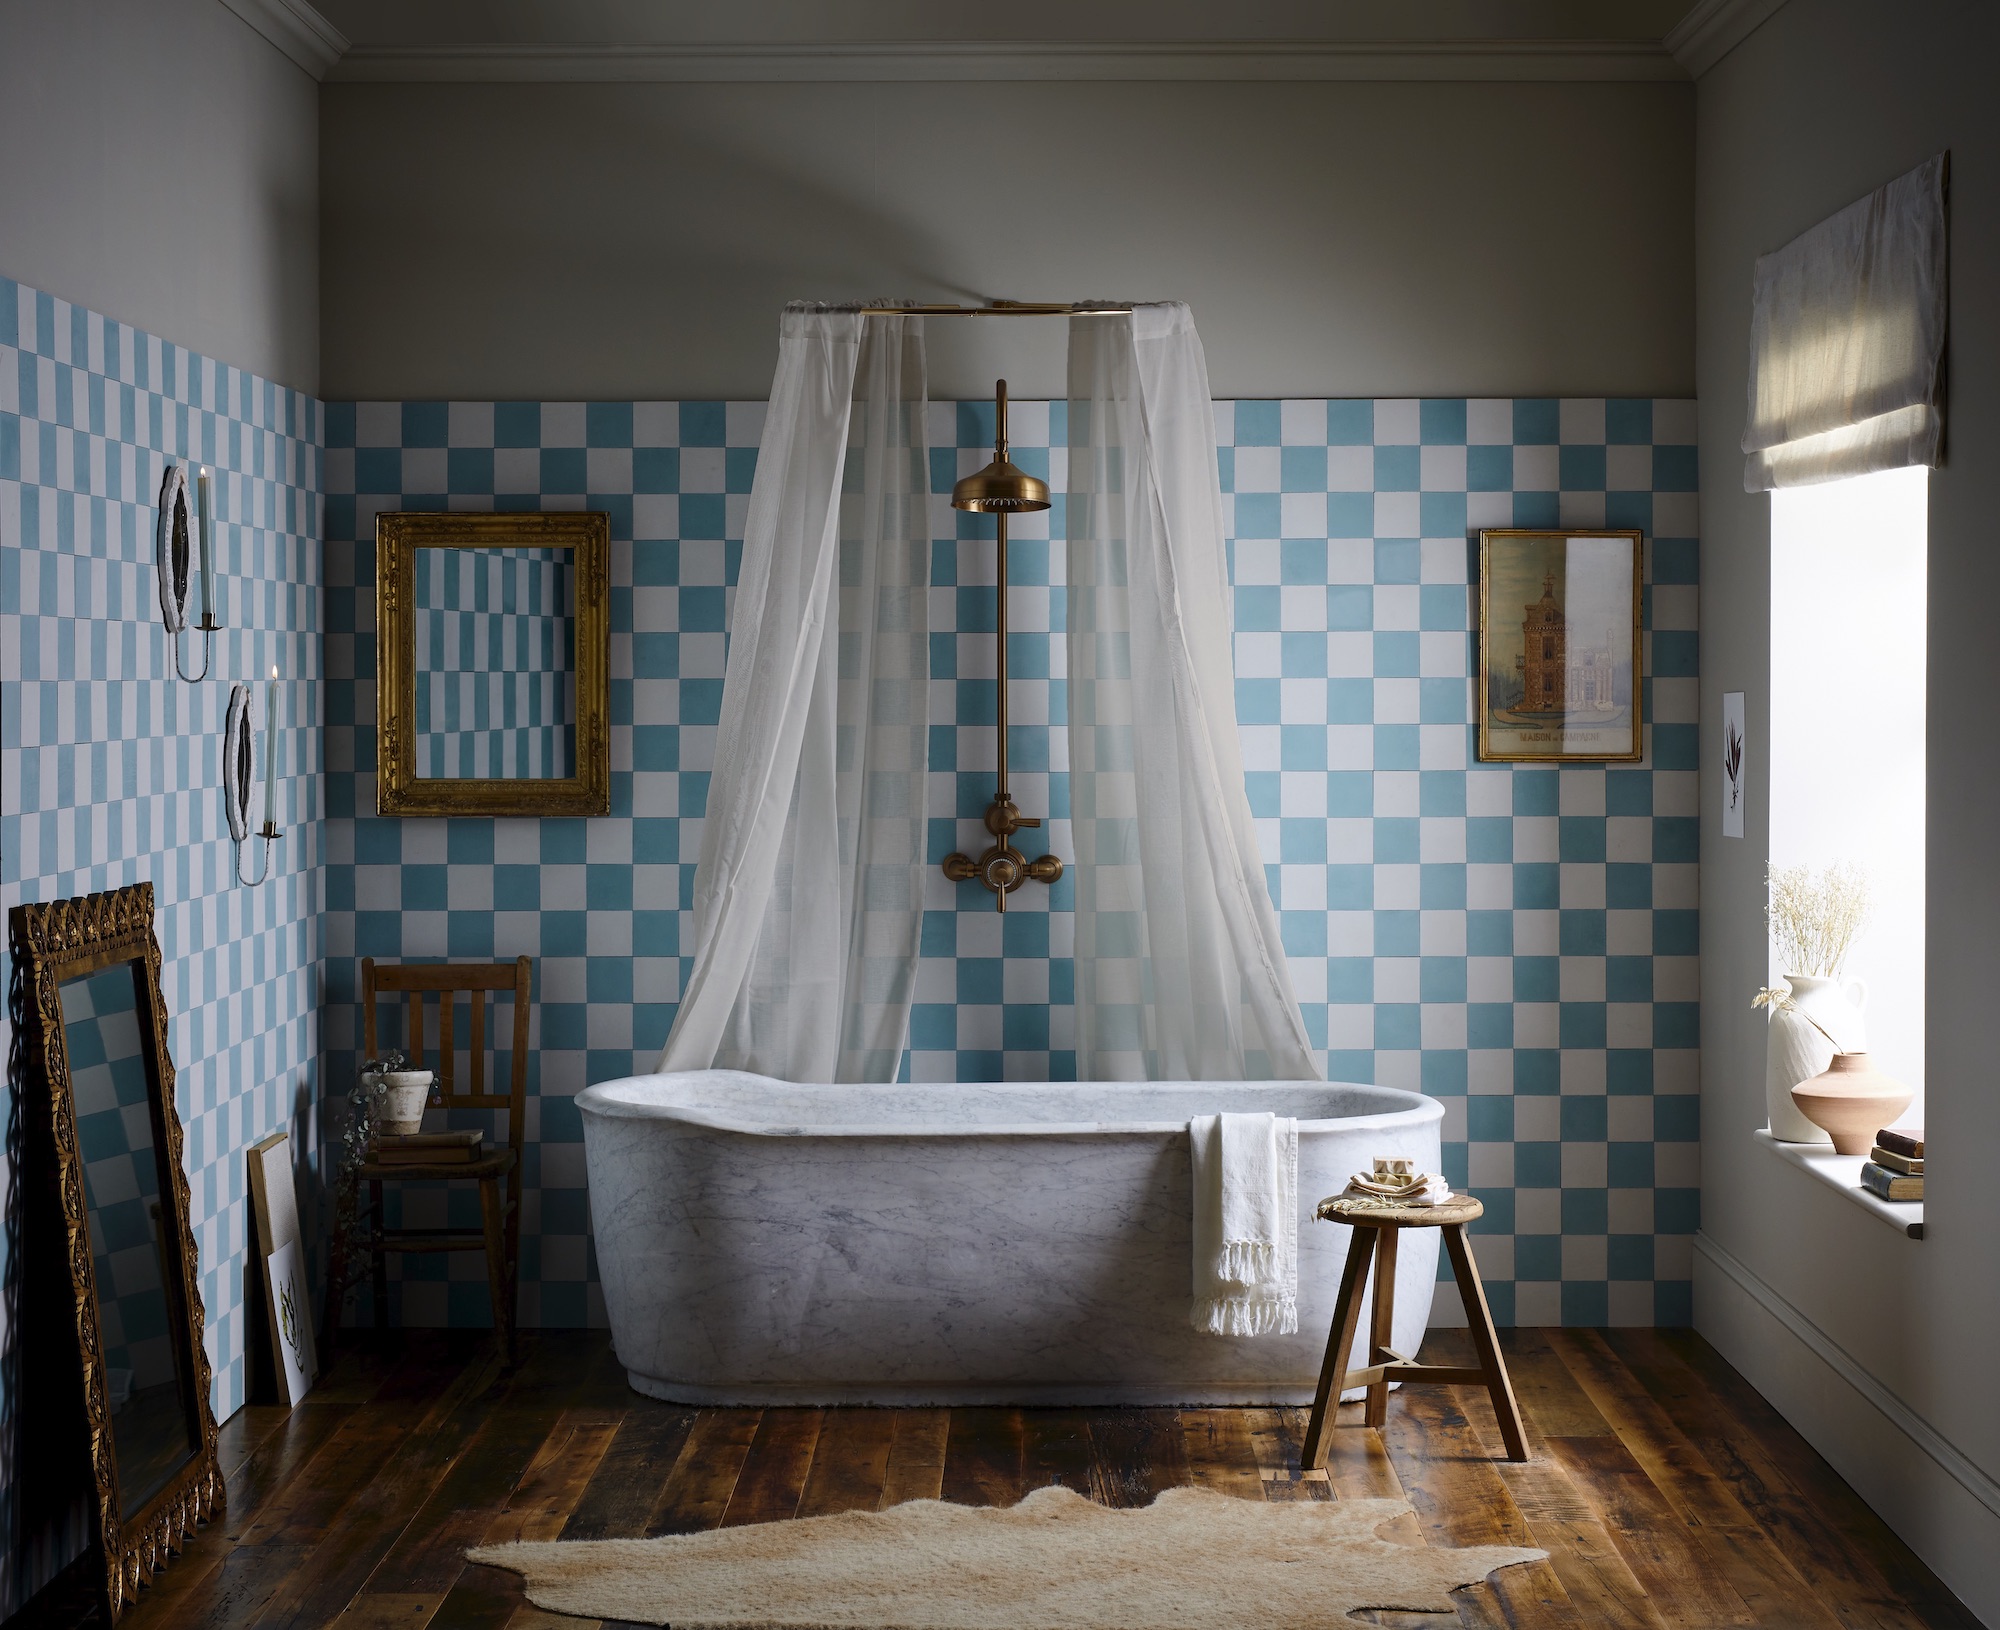 Pastel tiles in a bathroom by Bert & May in Effect Magazine